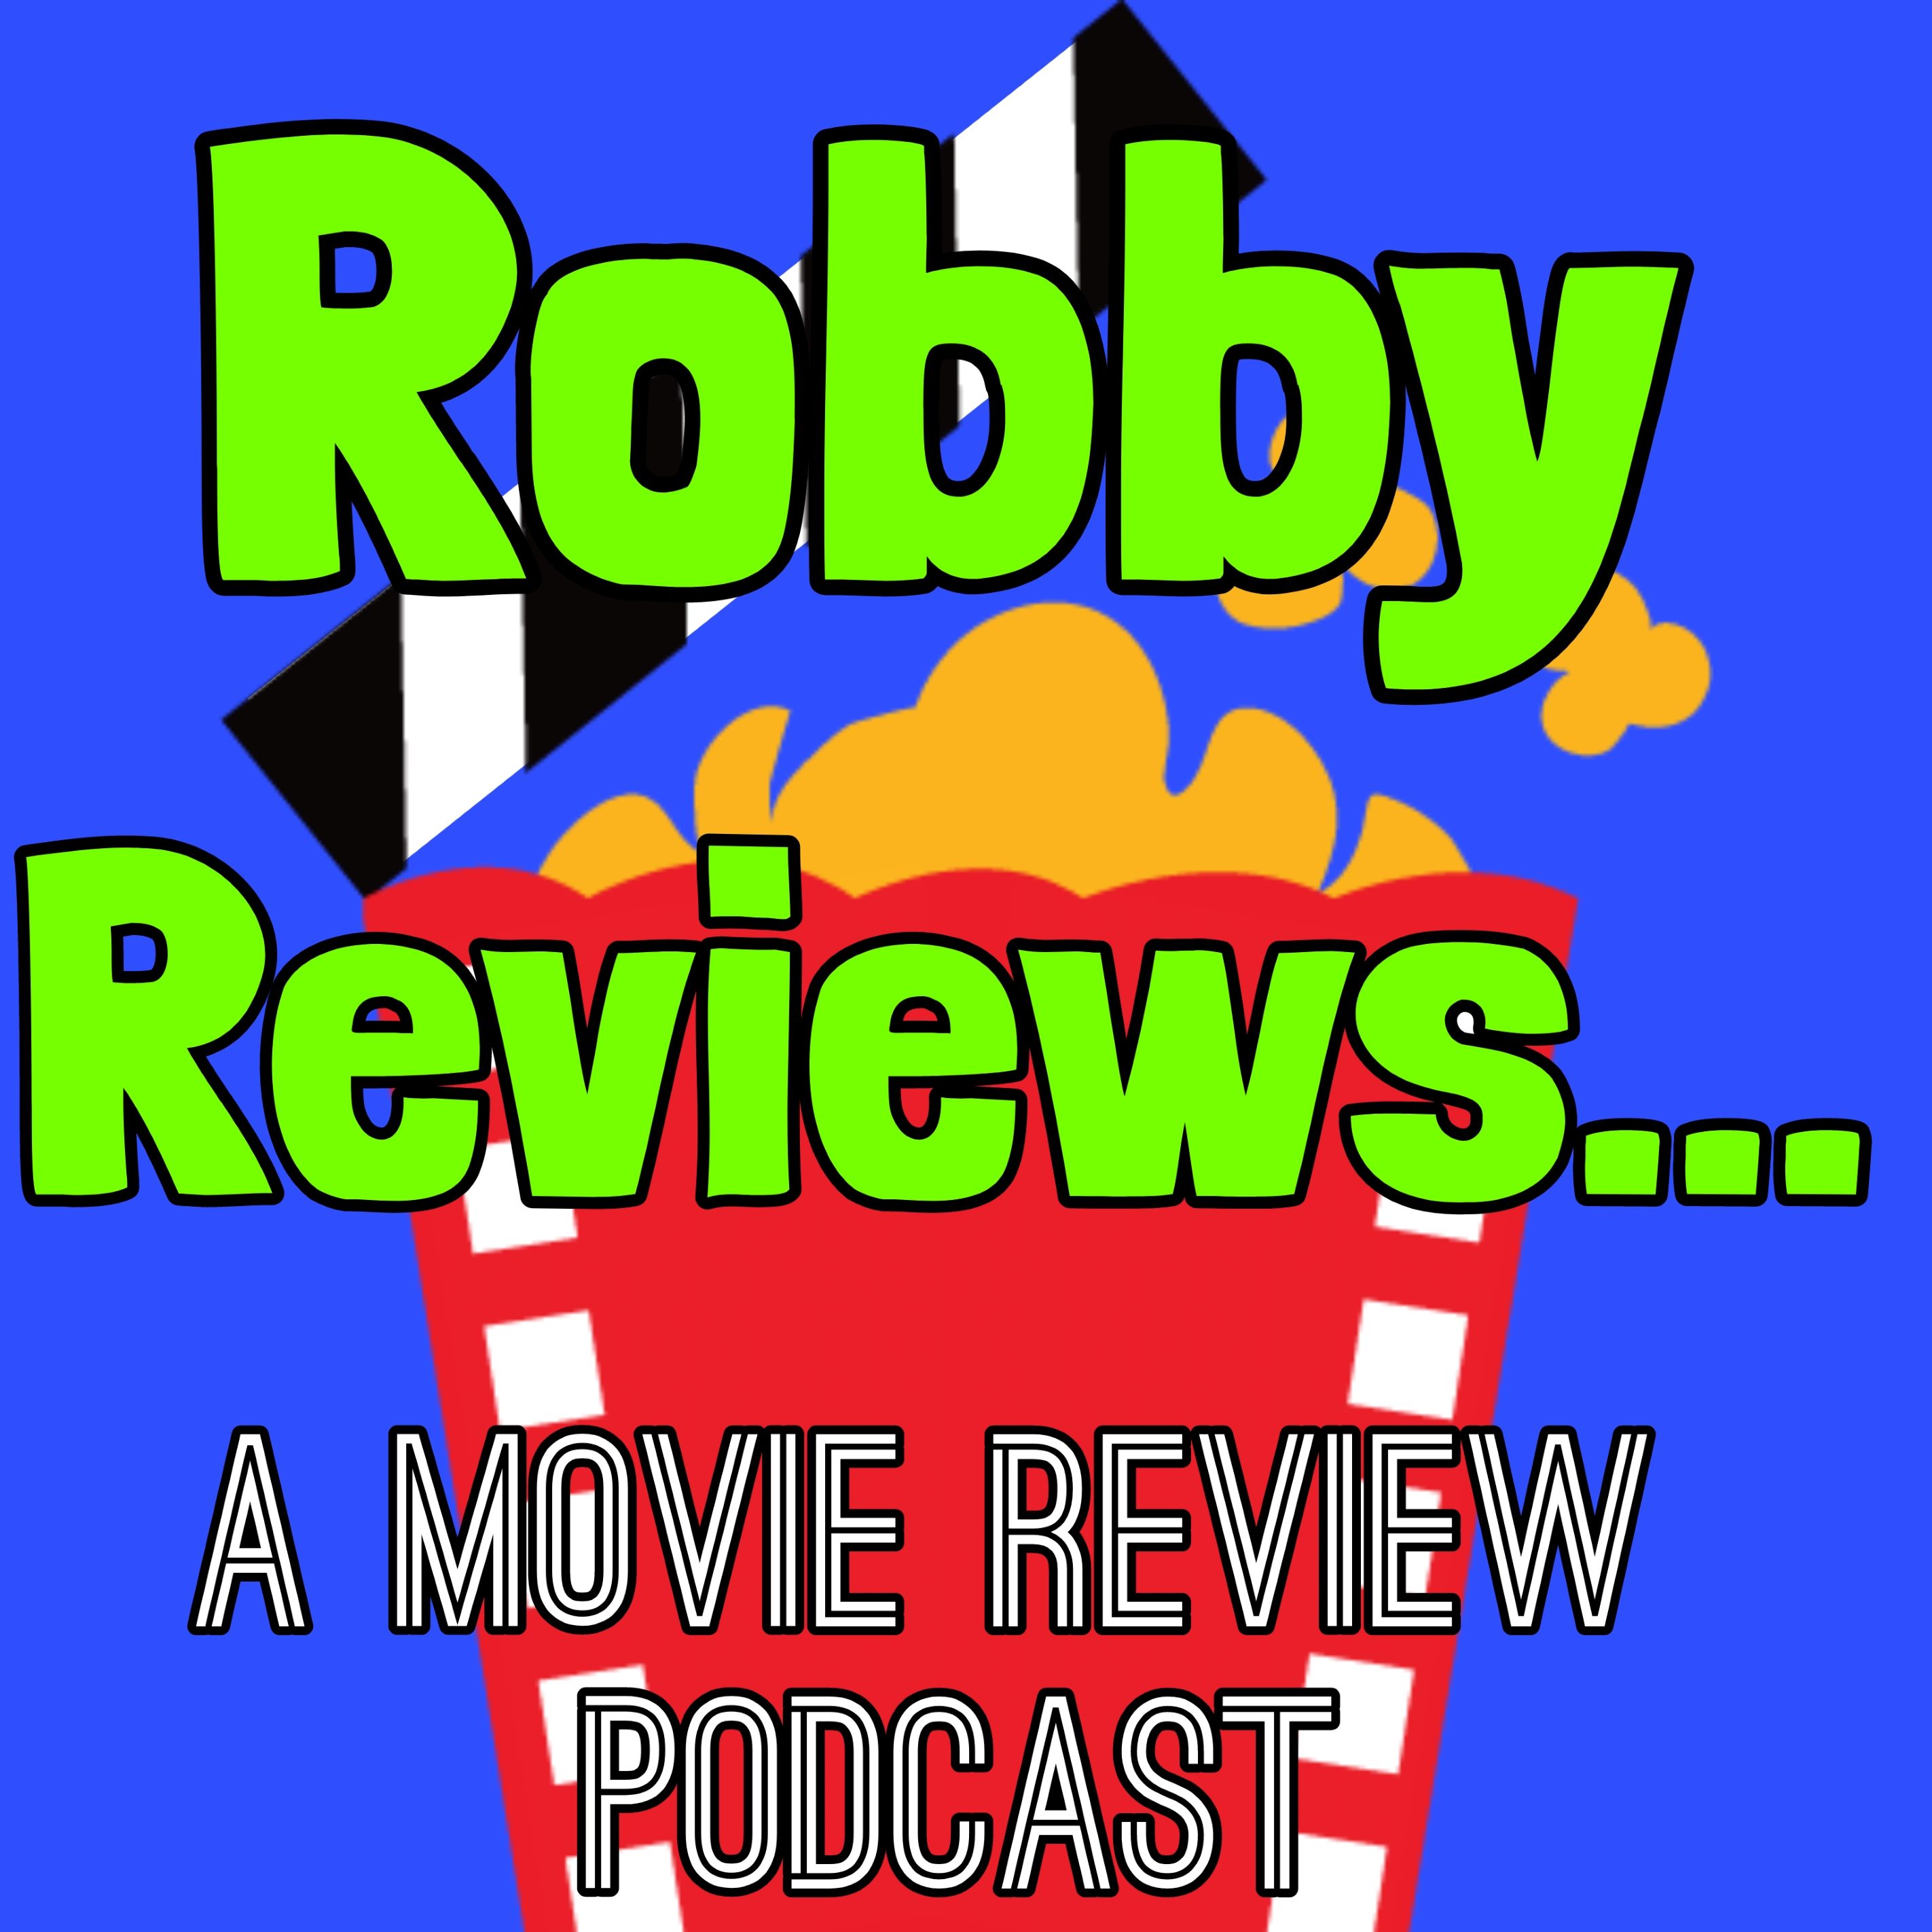 Artwork for Robby Reviews...